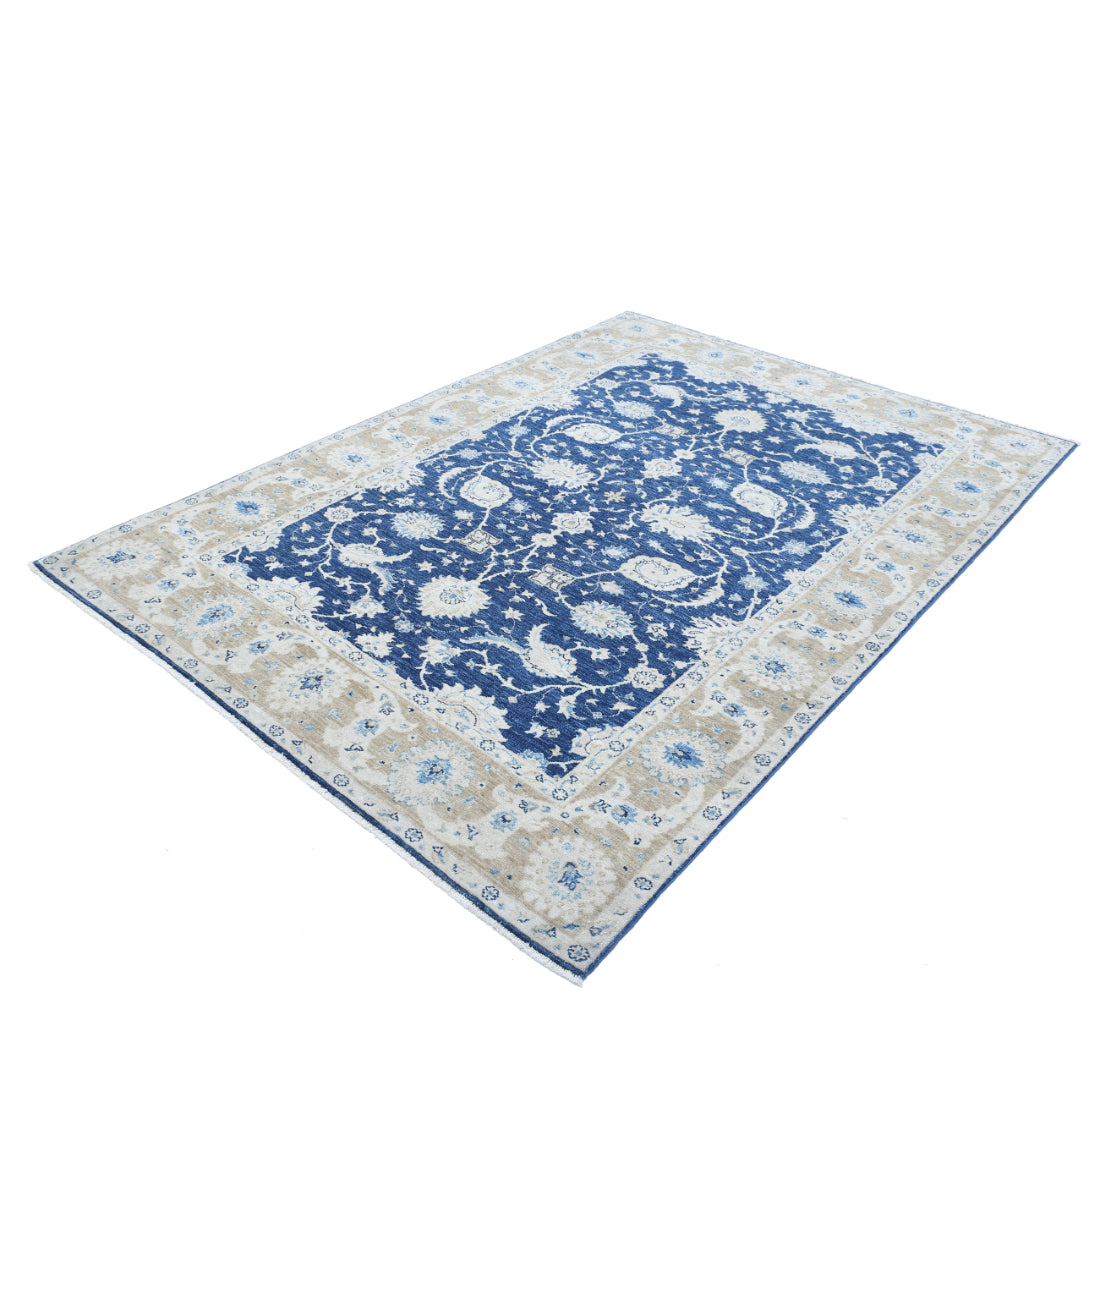 Hand Knotted Ziegler Farhan Wool Rug - 5'6'' x 7'11'' 5'6'' x 7'11'' (165 X 238) / Blue / Taupe